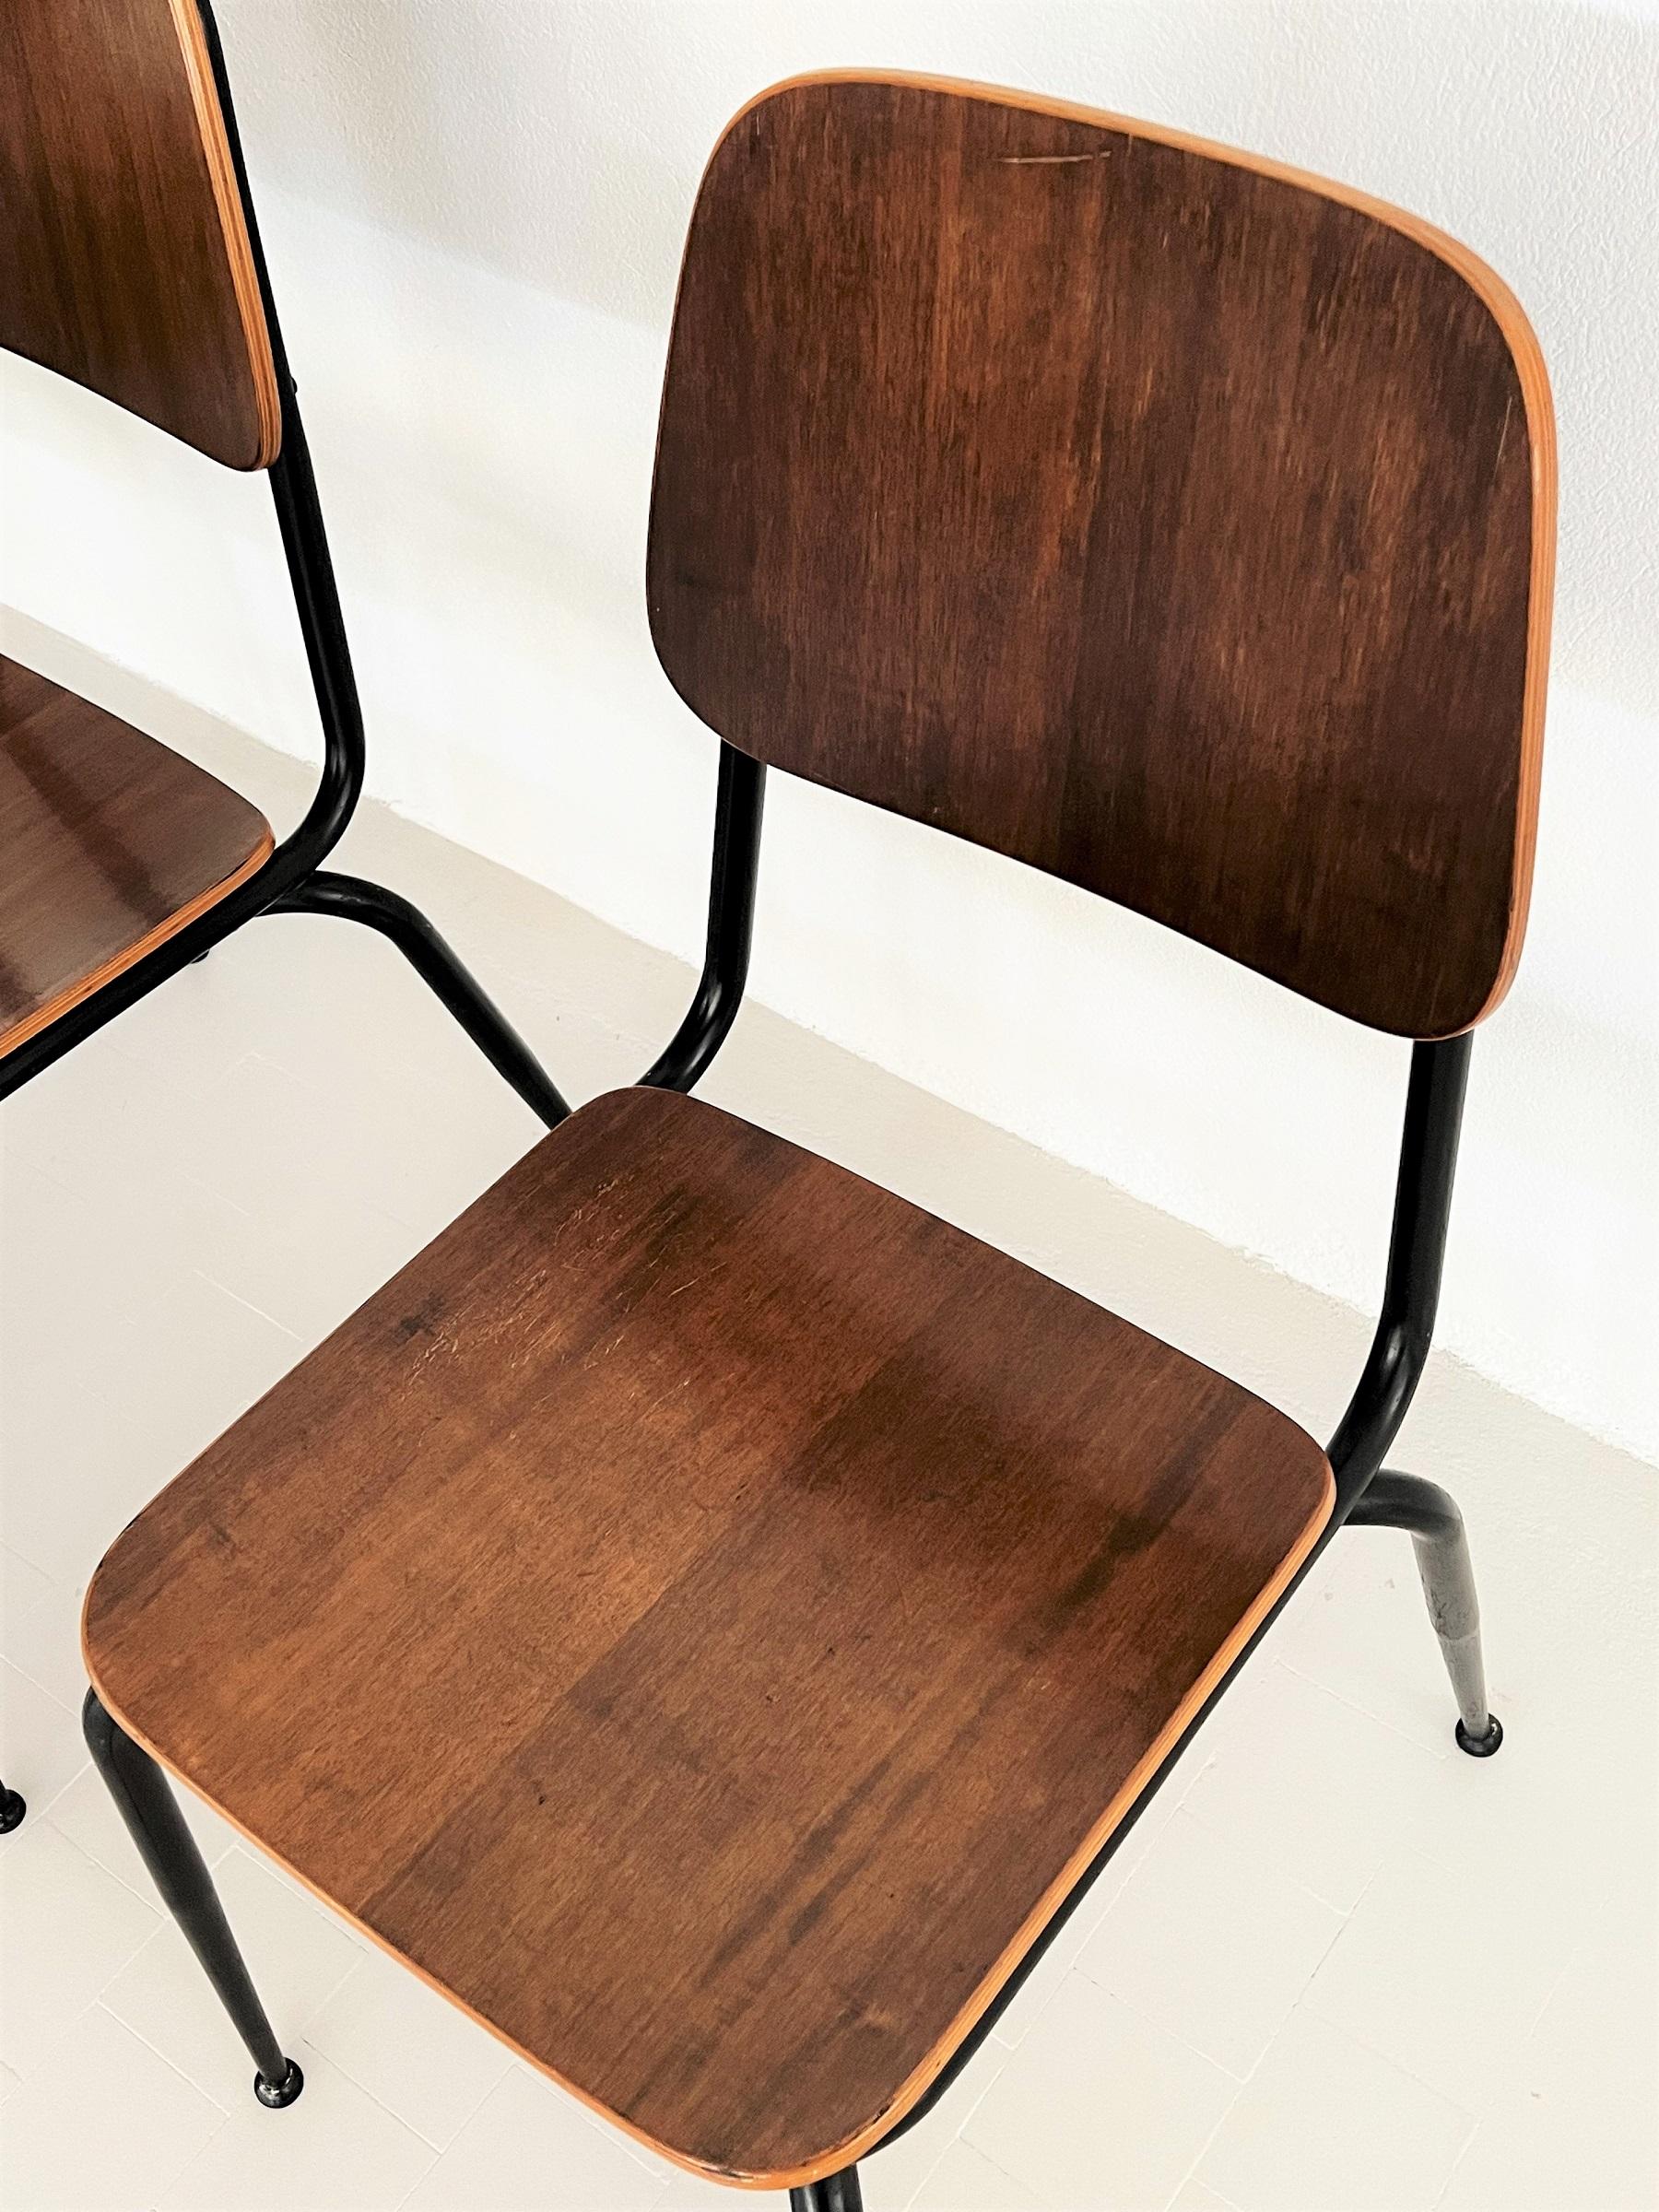 Metal Italian Mid-Century Plywood Nutwood Chairs by Velca Legnano, 1960s For Sale